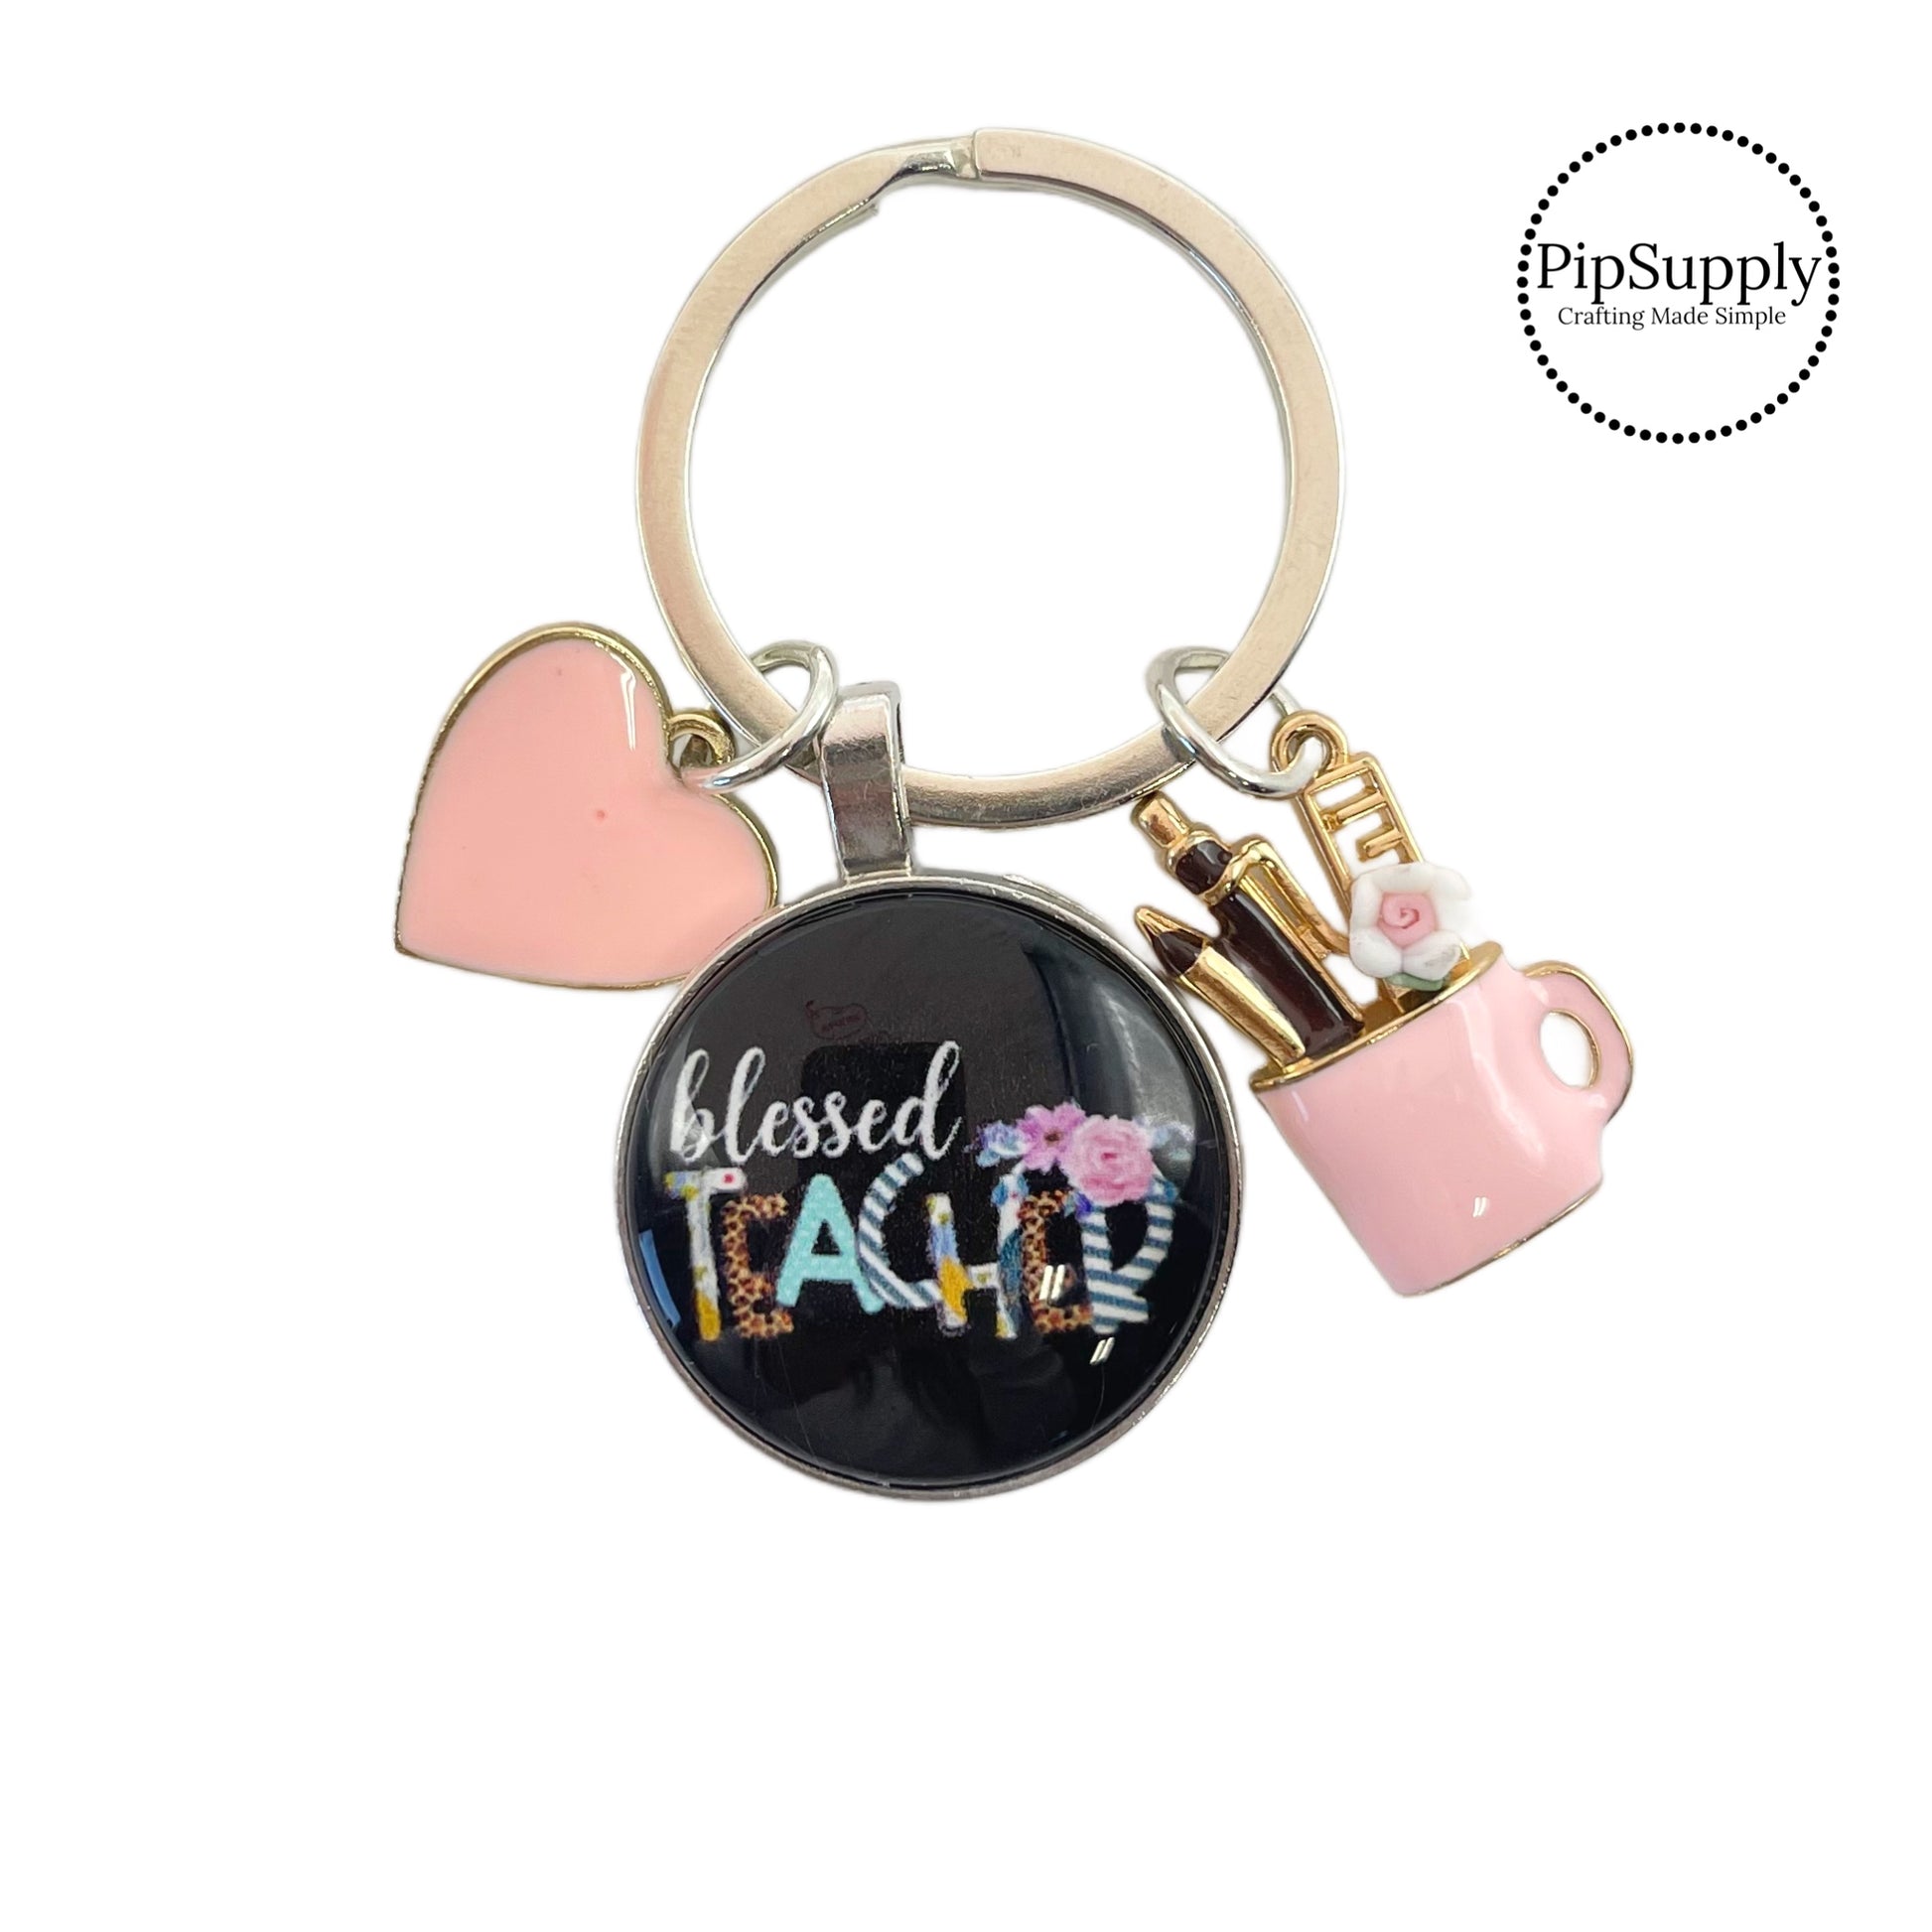 Pink heart charm, school supplies charm, and gratitude charm on a round silver keychain ring. The teacher appreciation charm has the following phrase: "Blessed Teacher." These silver key chains are perfect to add to your everyday key ring or give as a gift to a teacher!! These are ready to use or sell to others.